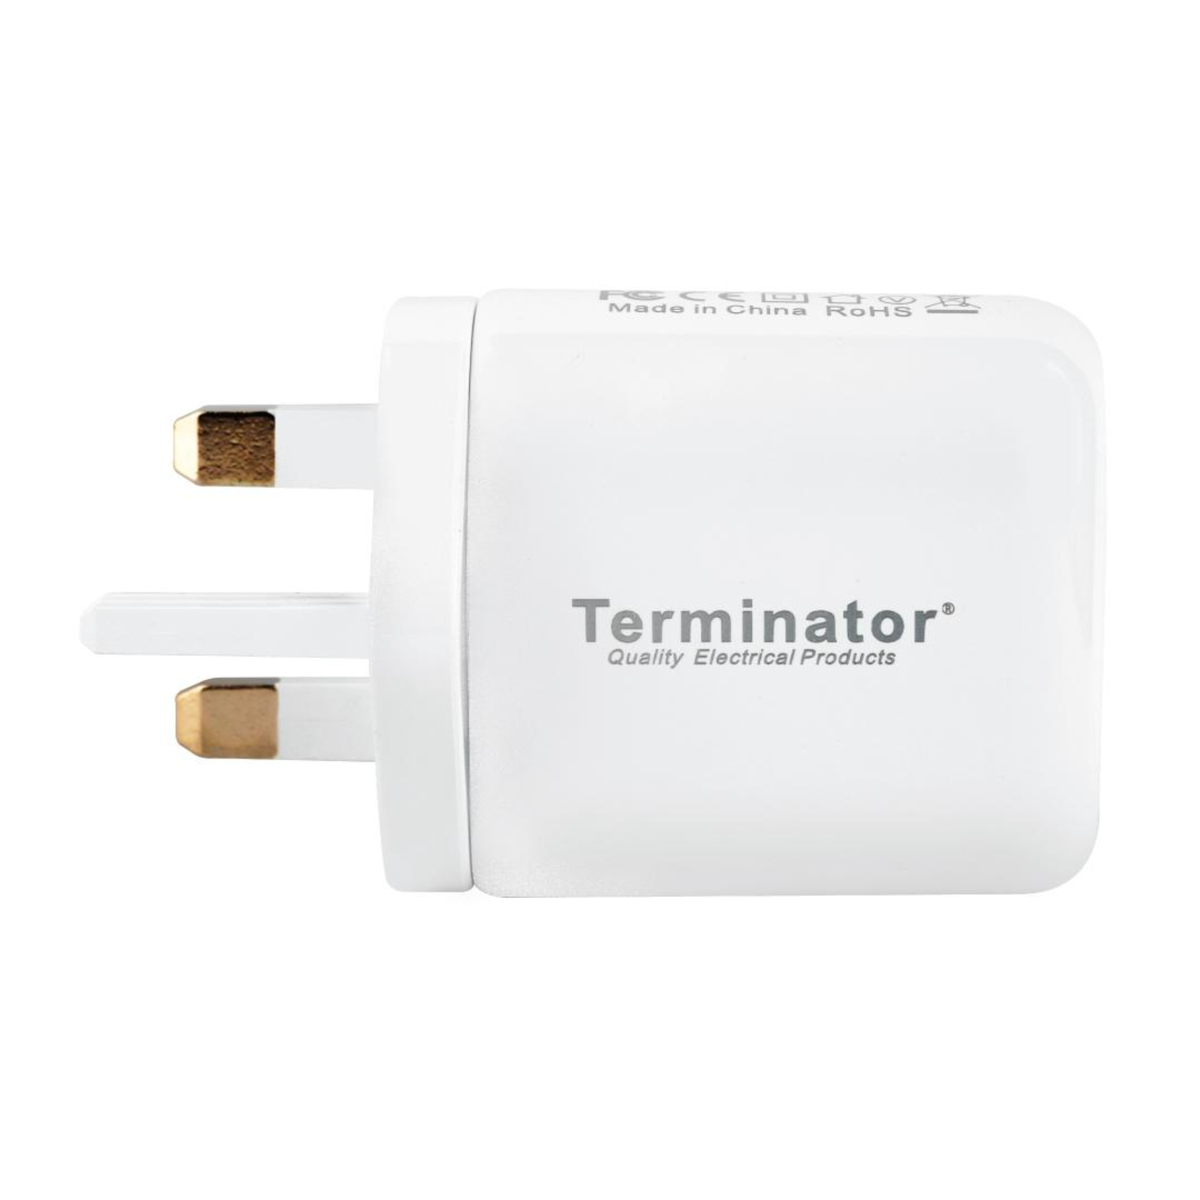 Terminator Wall Charger with Blue Light Indicator, 38W, White, TUSBWC02